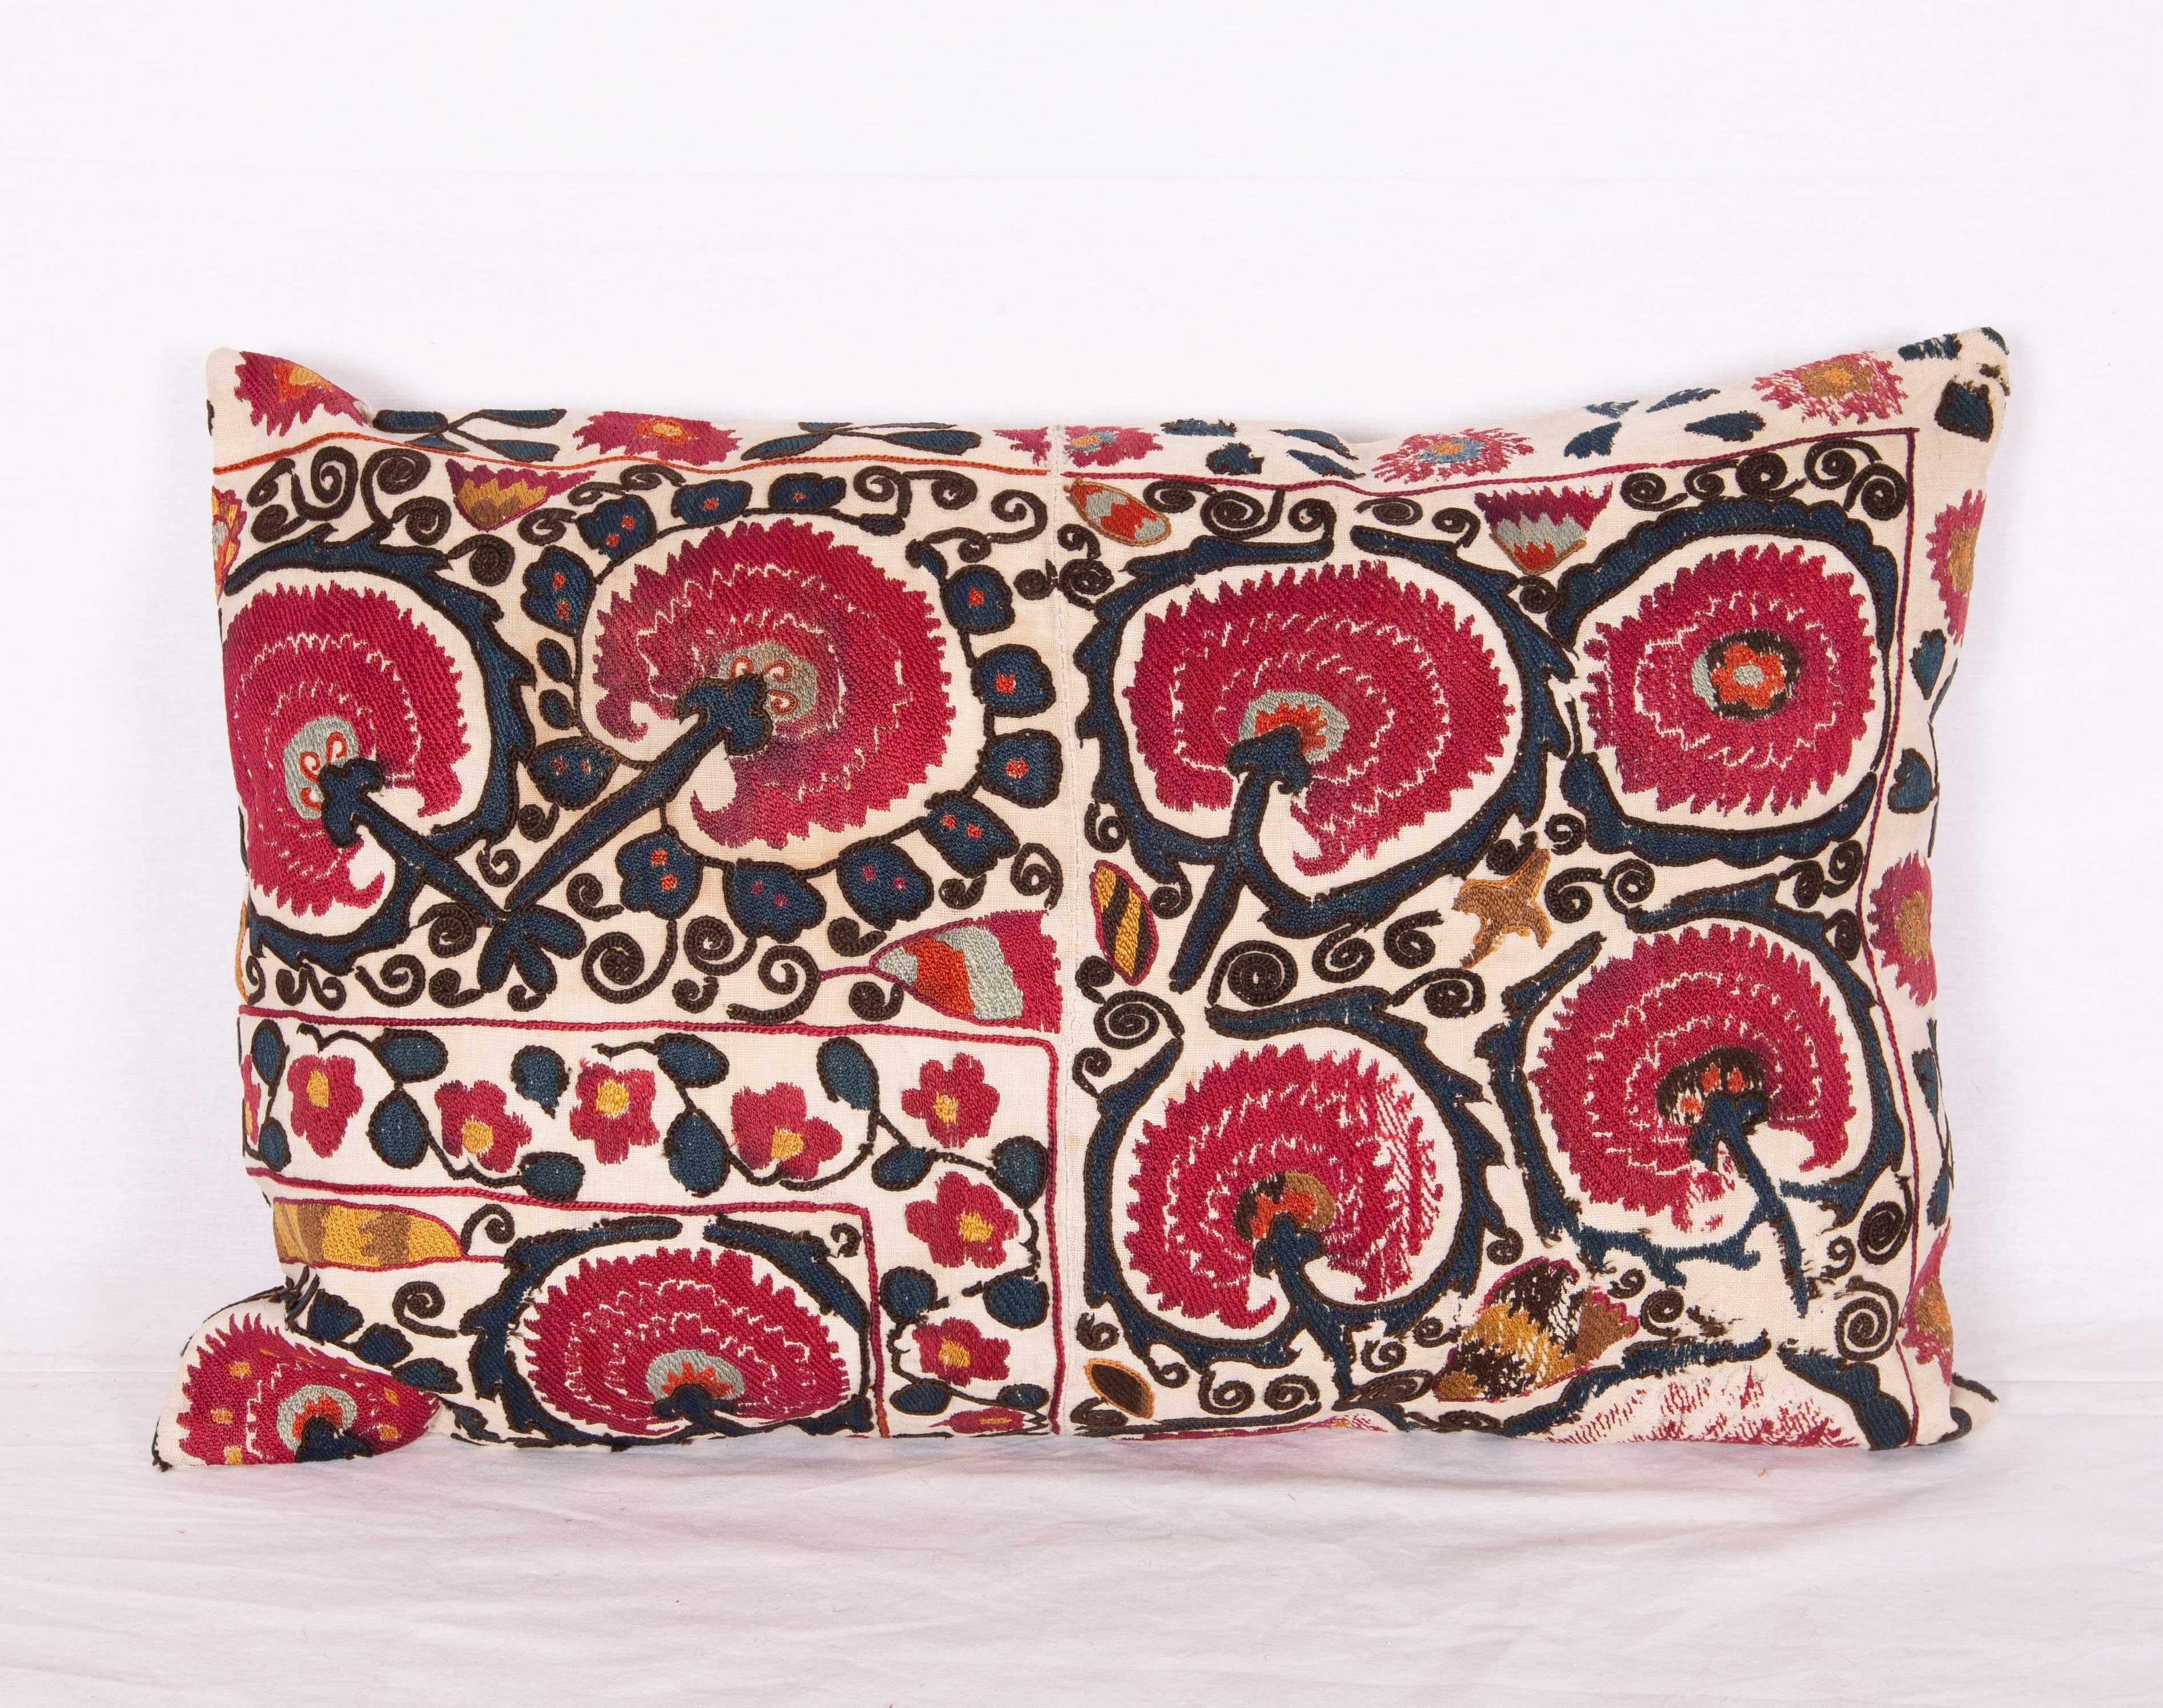 The pillow case is made from an antique Tajik Suzani from Ura Tube. It is silk embroidery on a handwoven cotton field. The backing is pure linen, and they do not come with inserts but bags made to the size in cotton to accommodate insert materials.